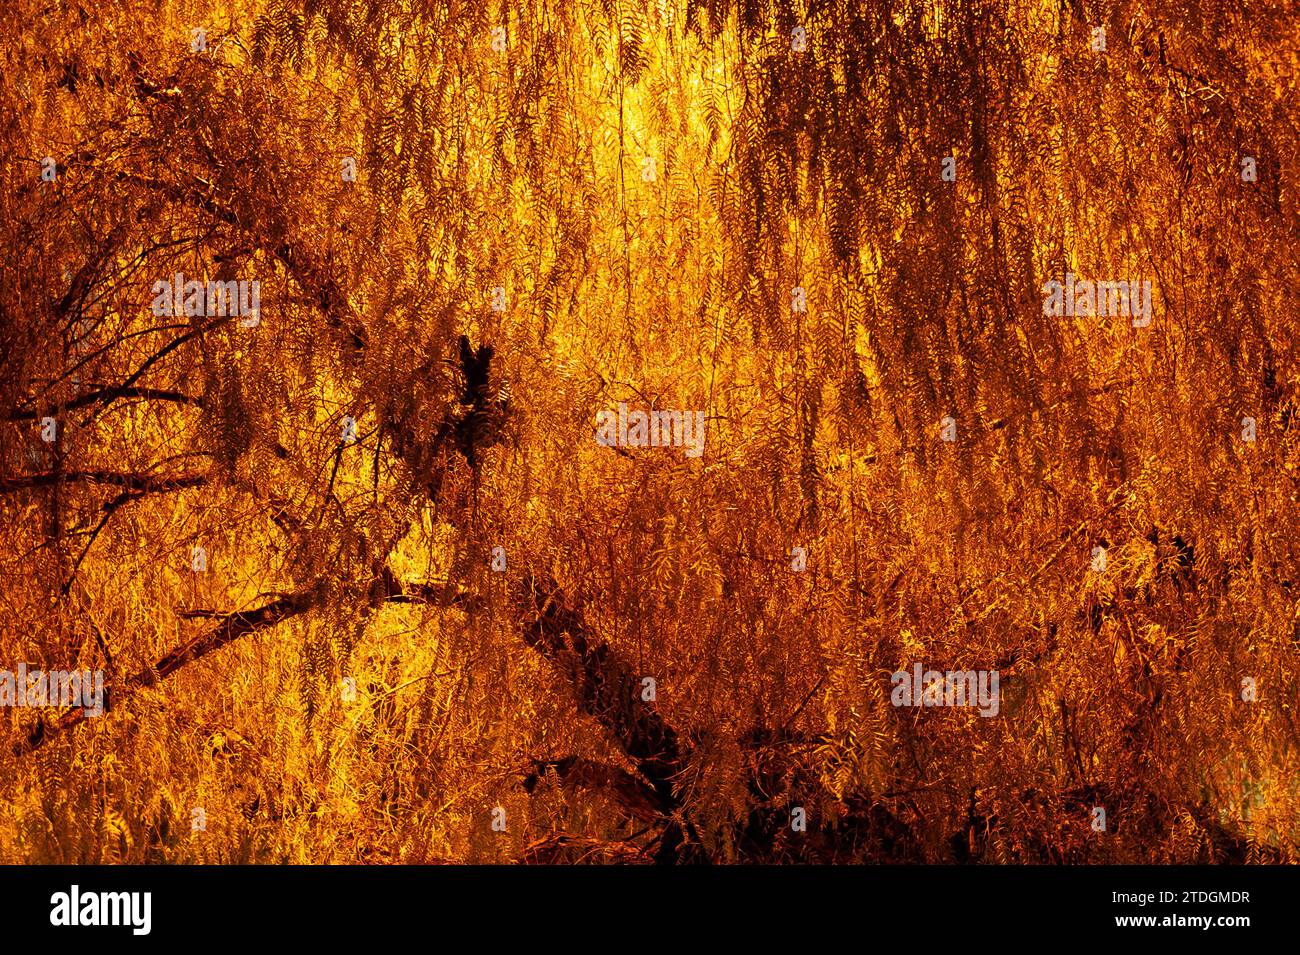 Abstract cloesup of the corwn of a tree, branches and leaves illuminated by artficial orange light at night. Stock Photo